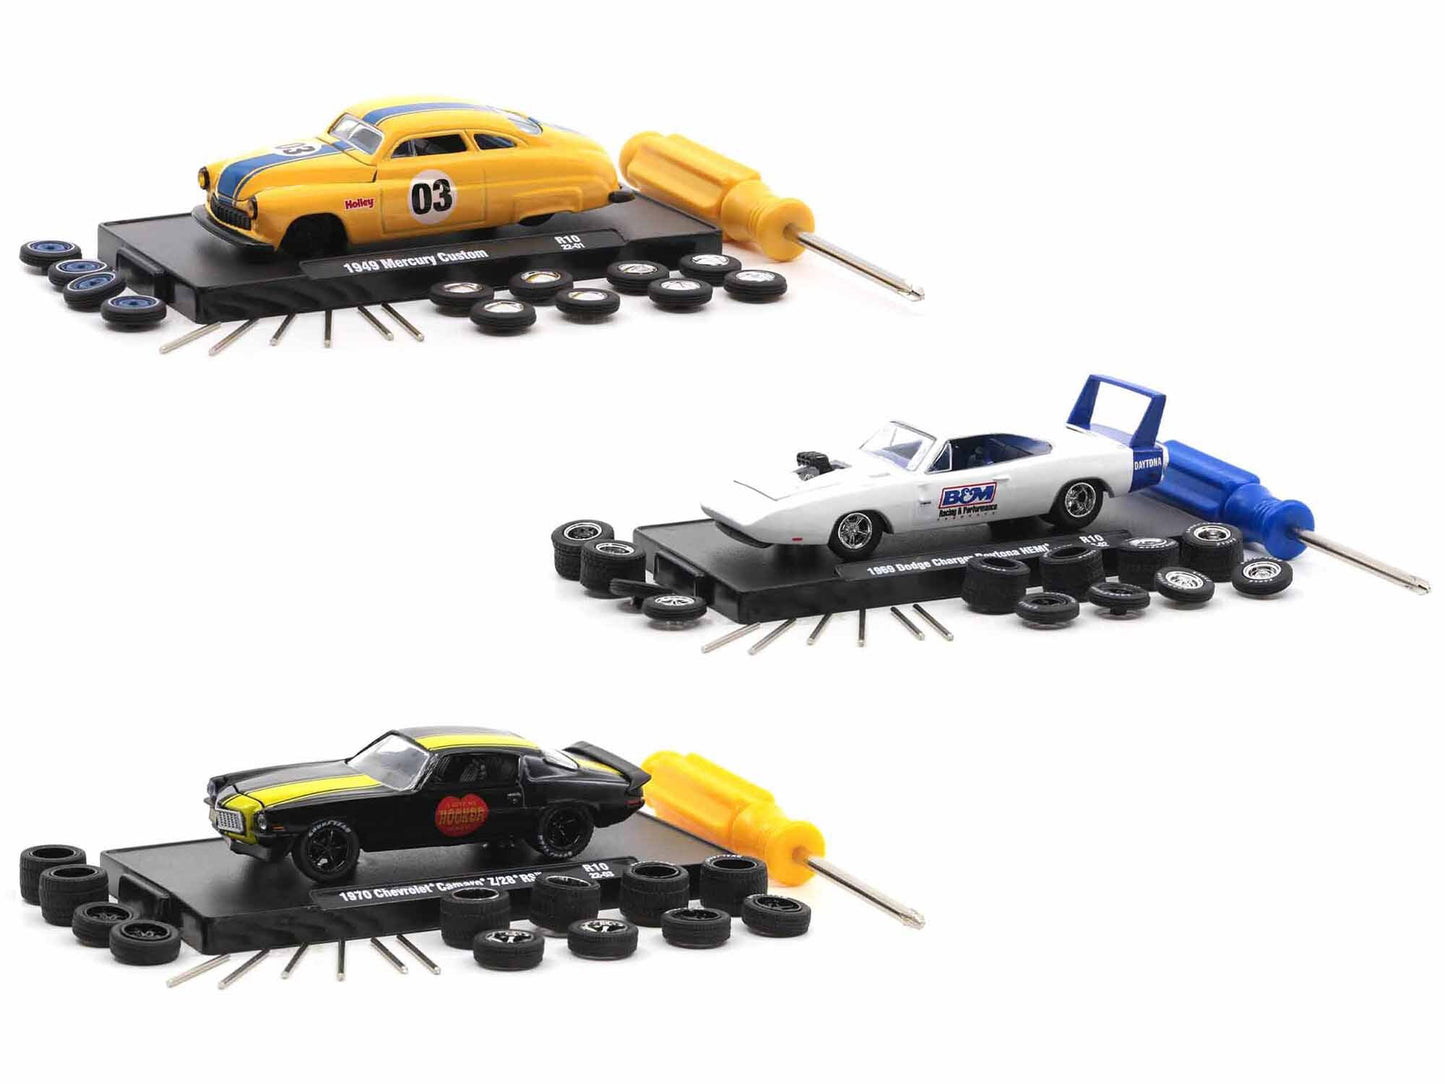 "Auto Wheels" 3 piece Car Set Release 10 Limited Edition to 5000 pieces Worldwide 1/64 Diecast Model Cars by M2 Machines